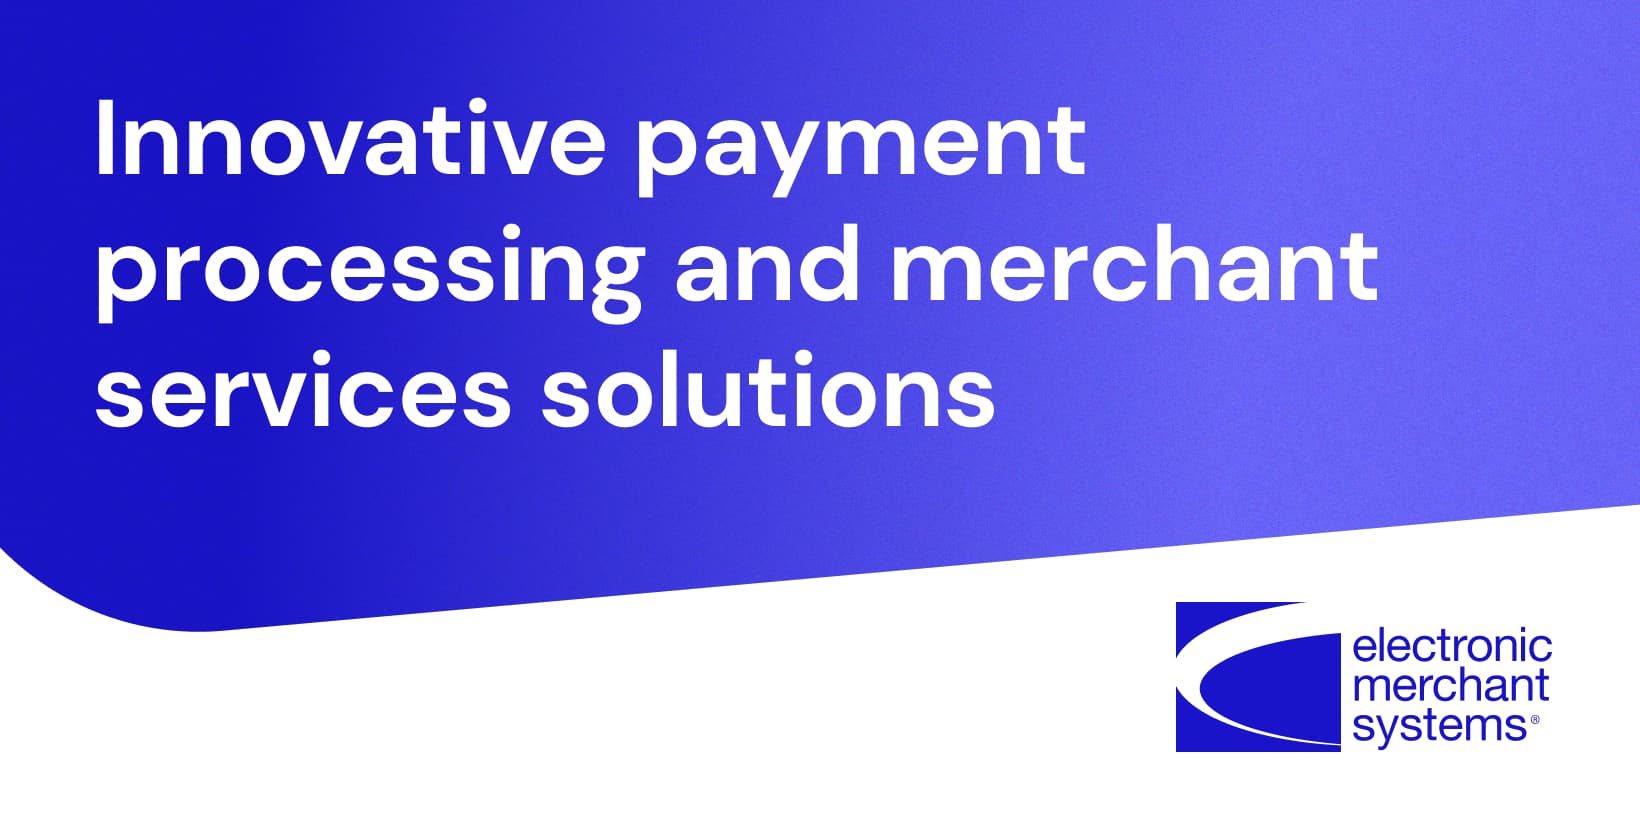 Electronic Merchant Systems: Payment Processing & POS Solutions